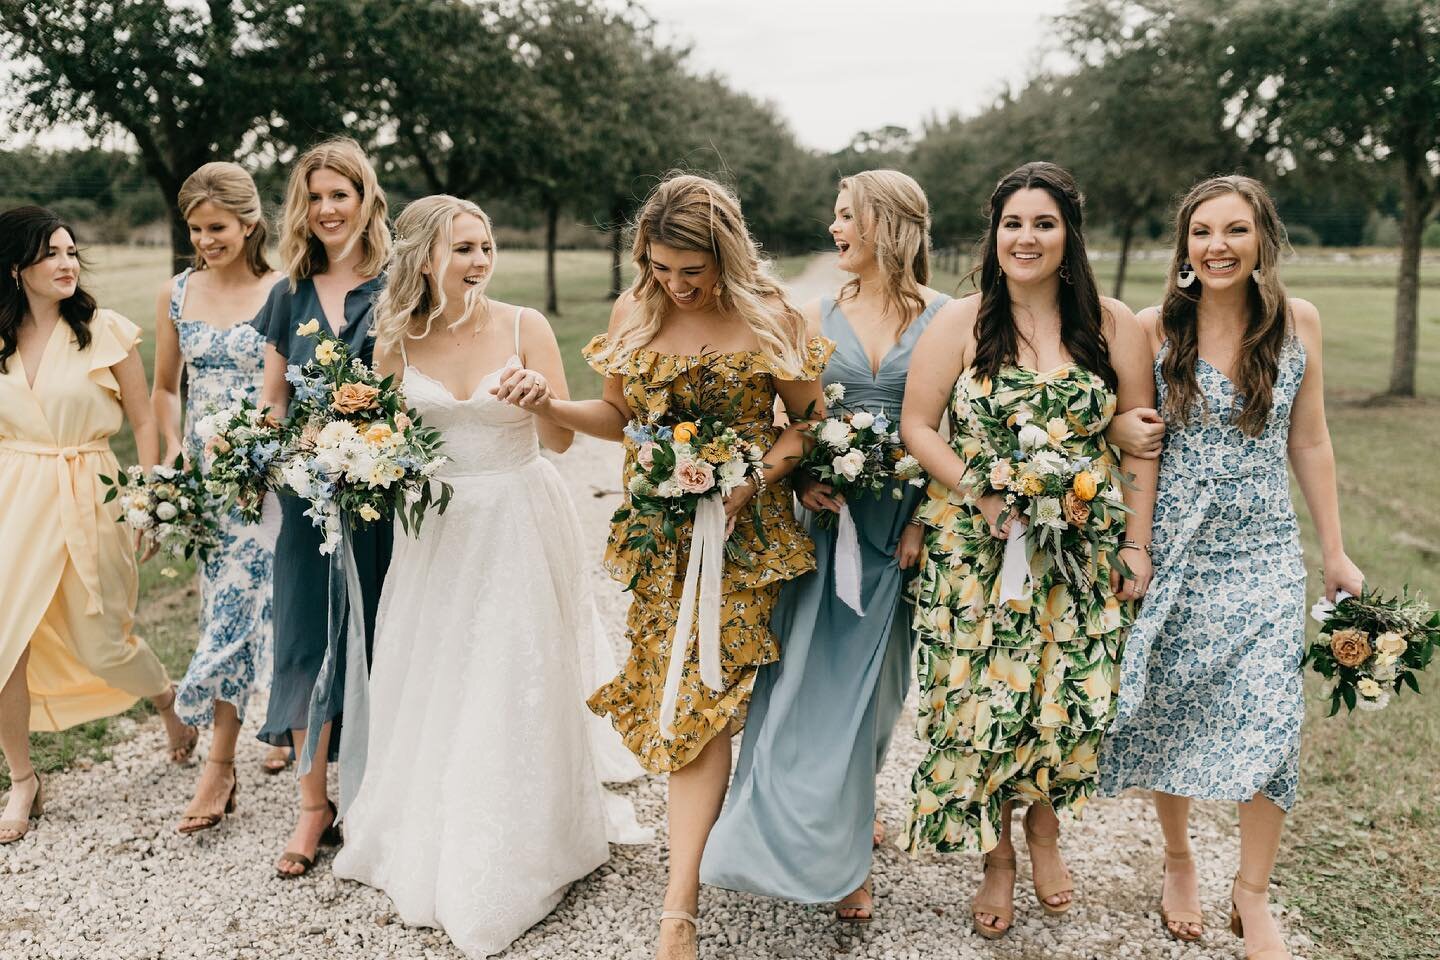 We&rsquo;re dreaming of being back at @congareeandpenn this fall ✨ more floral bridesmaids dresses too please 
.
.
.
.
#theantibride #antibrideweddings #floridawedding #floridaweddingplanner #weddingplanner #floridaweddingflorist #weddingflowers #tha